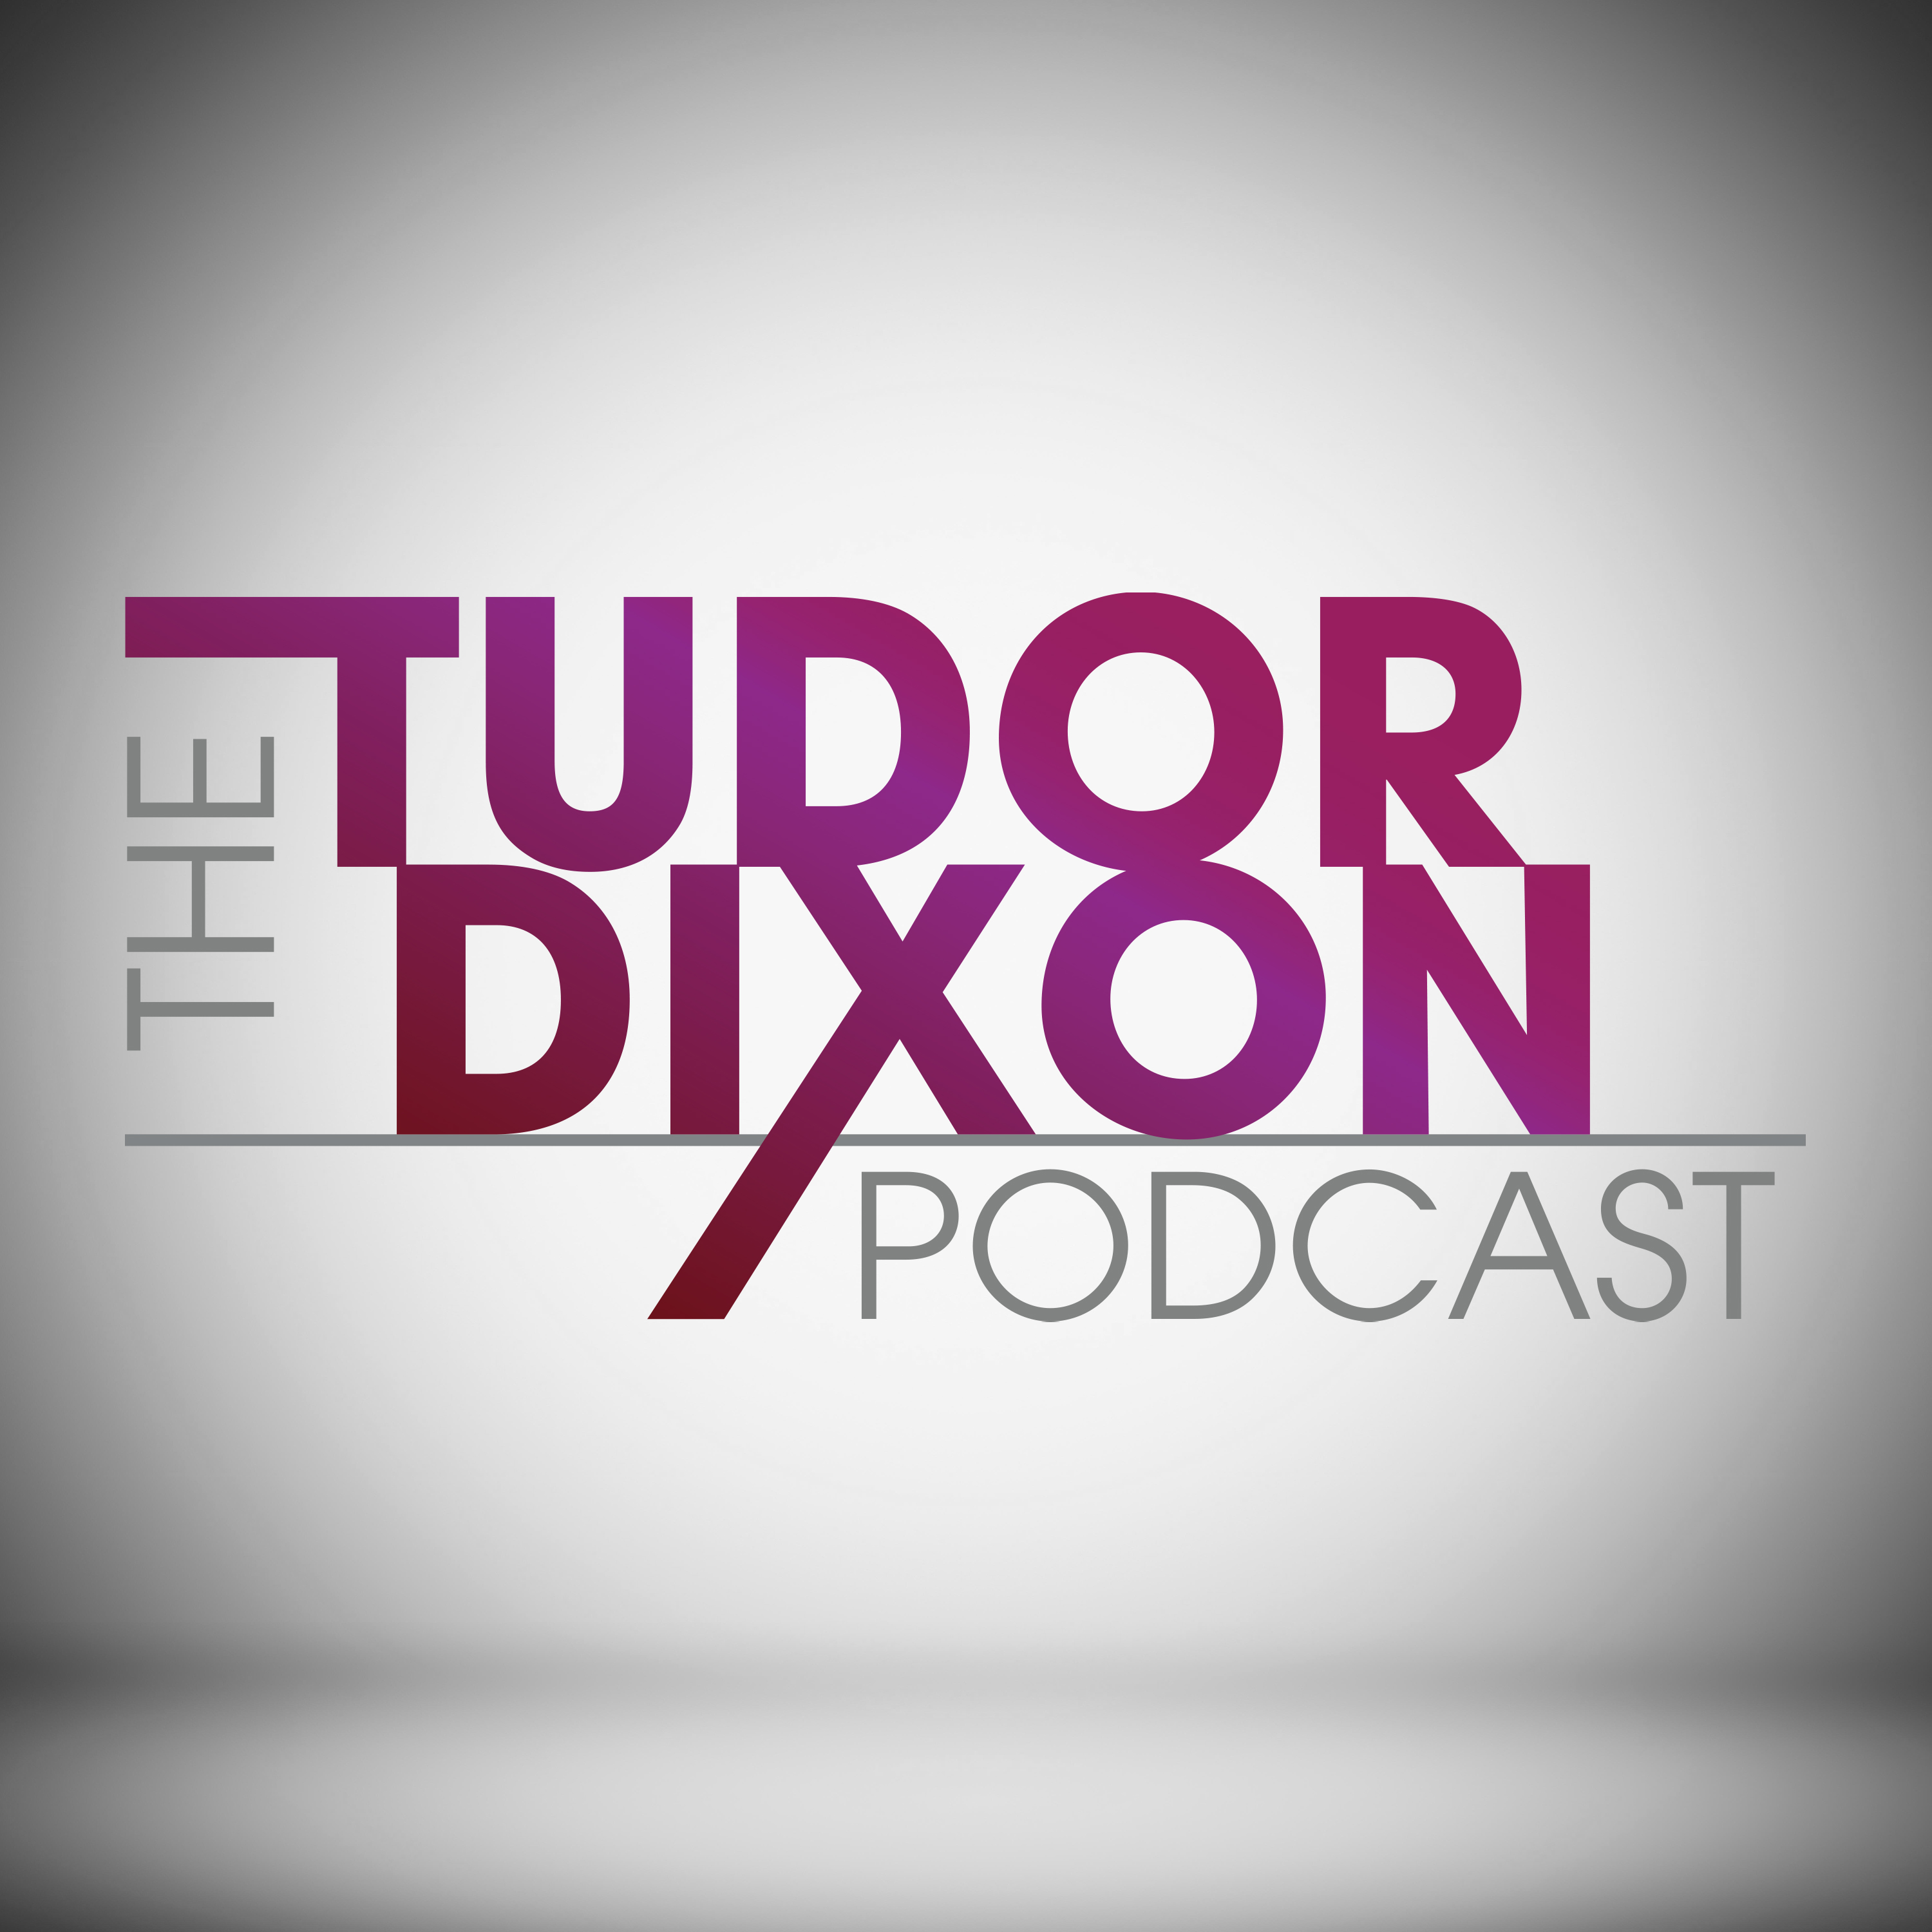 The Tudor Dixon Podcast: The War in Israel, Anti-Semitism, and The Urgent Need For Change